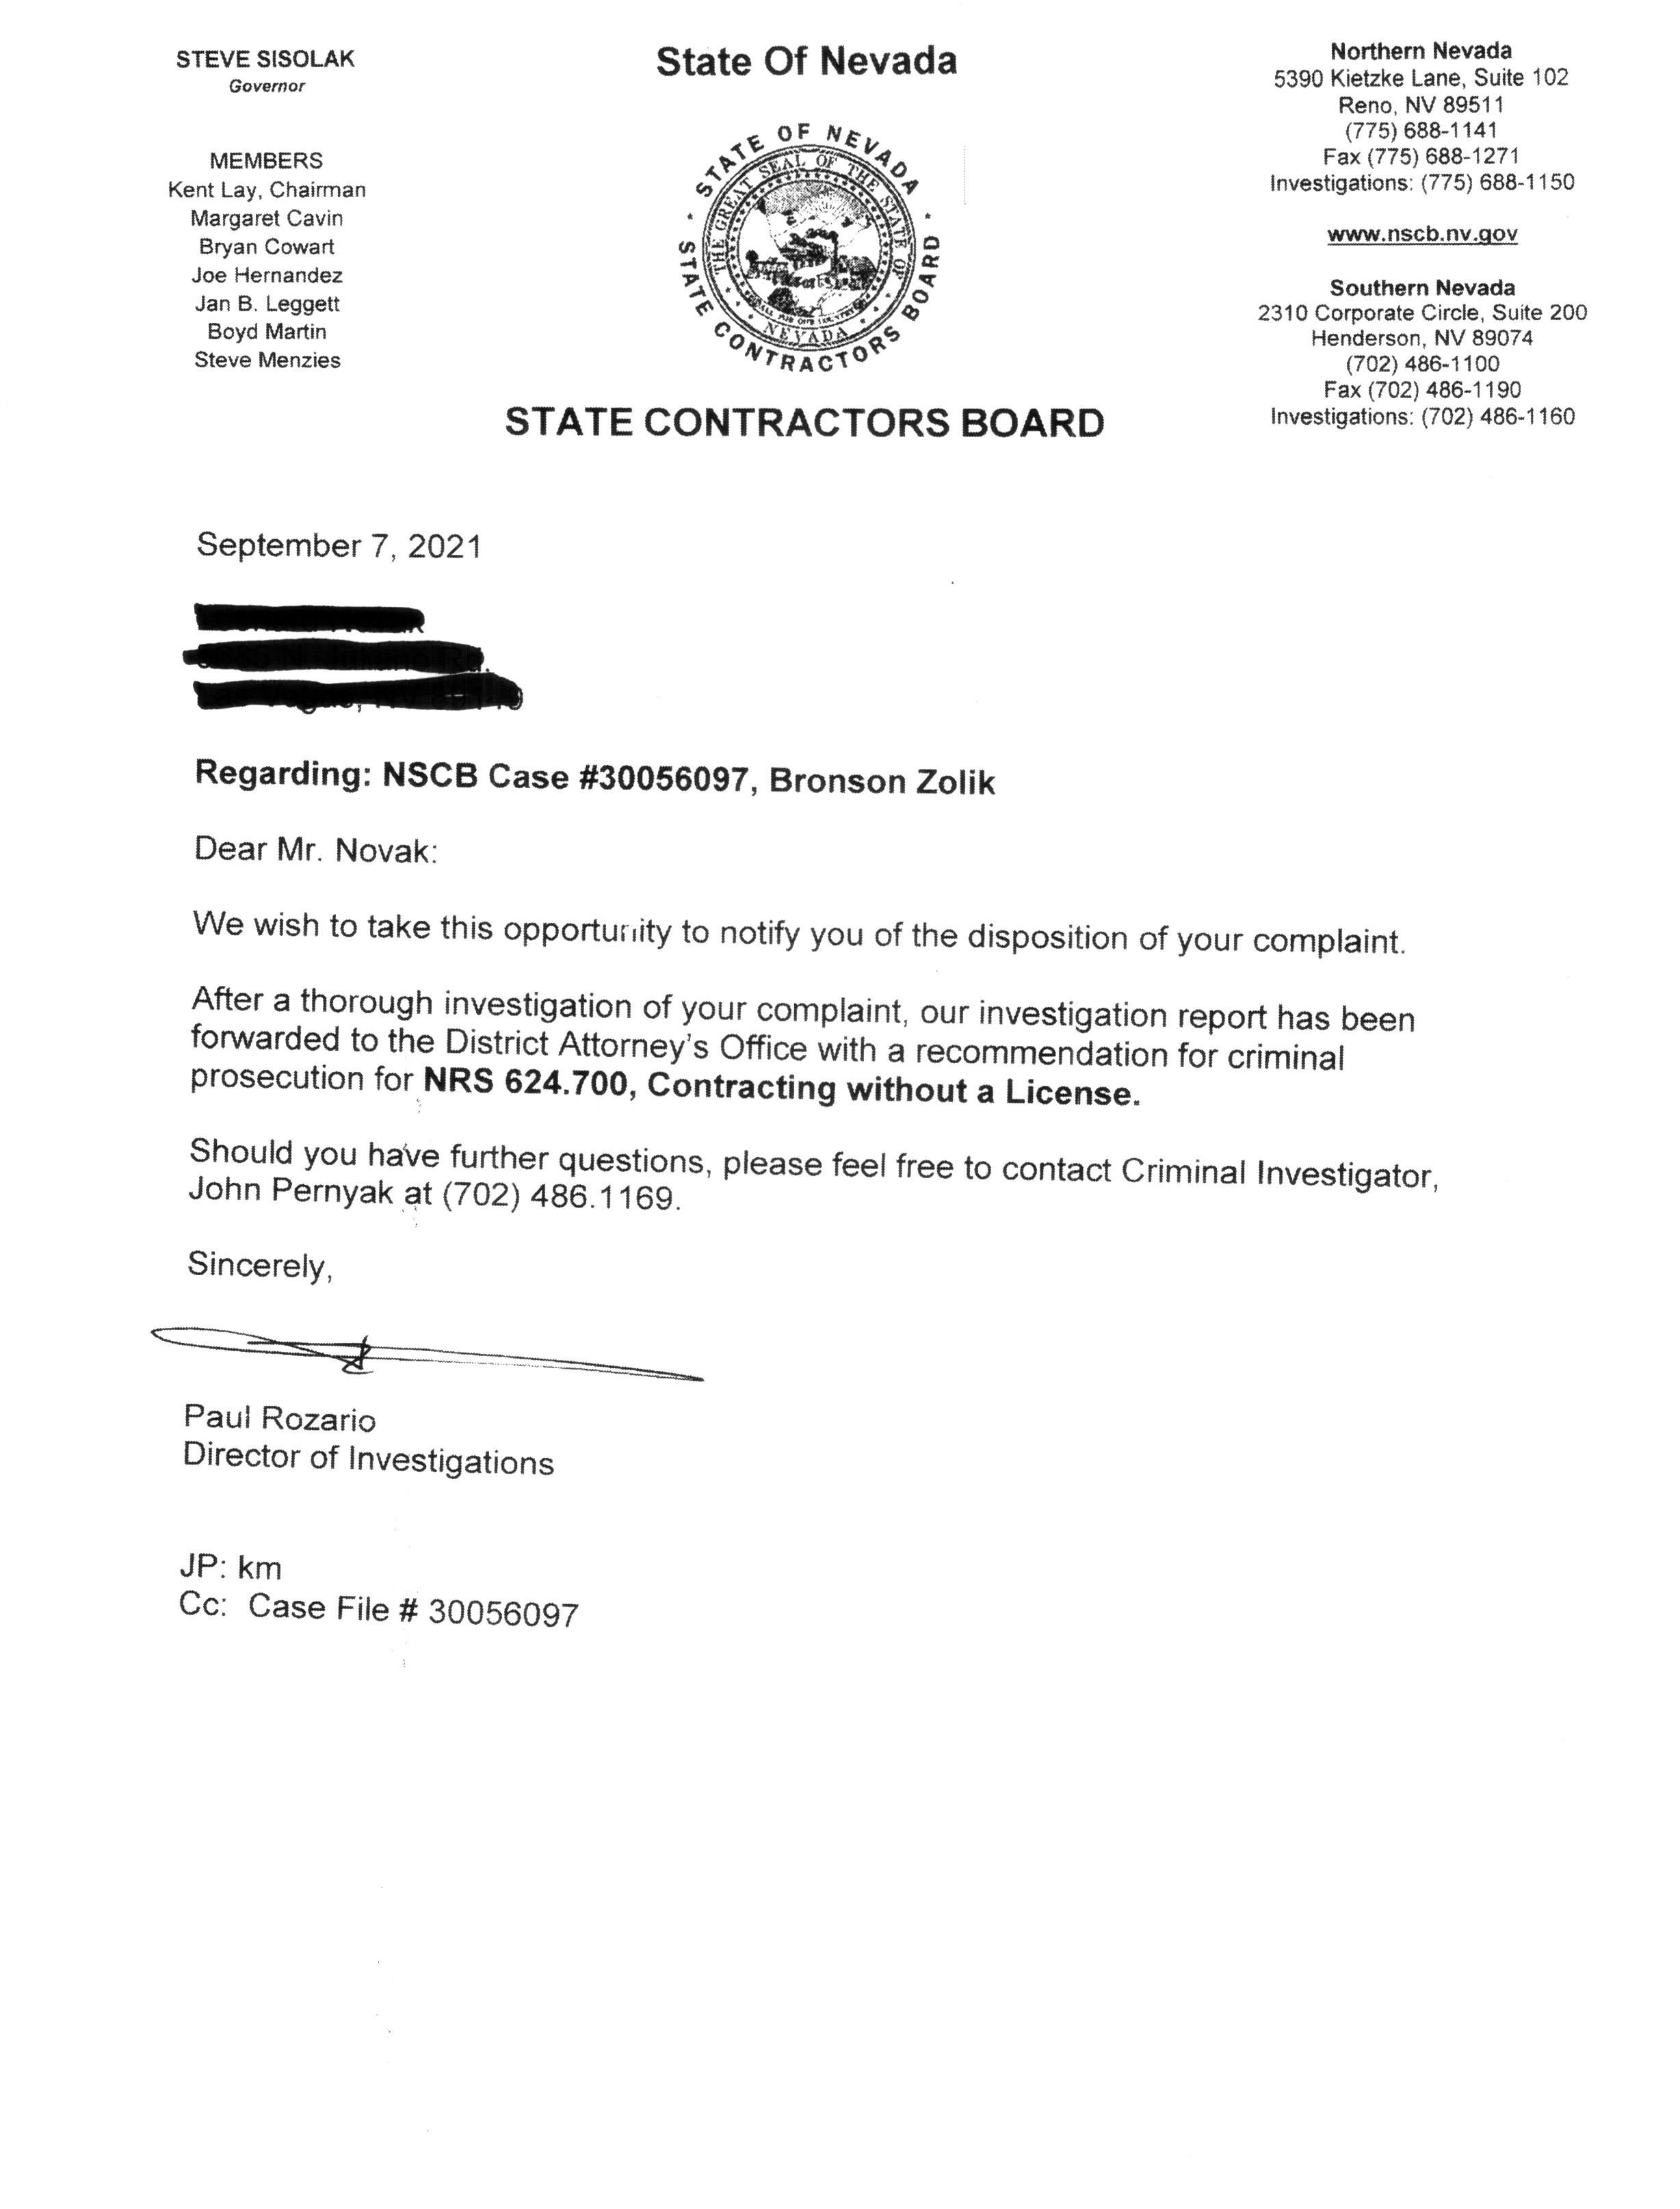 State Contractor Board Letter